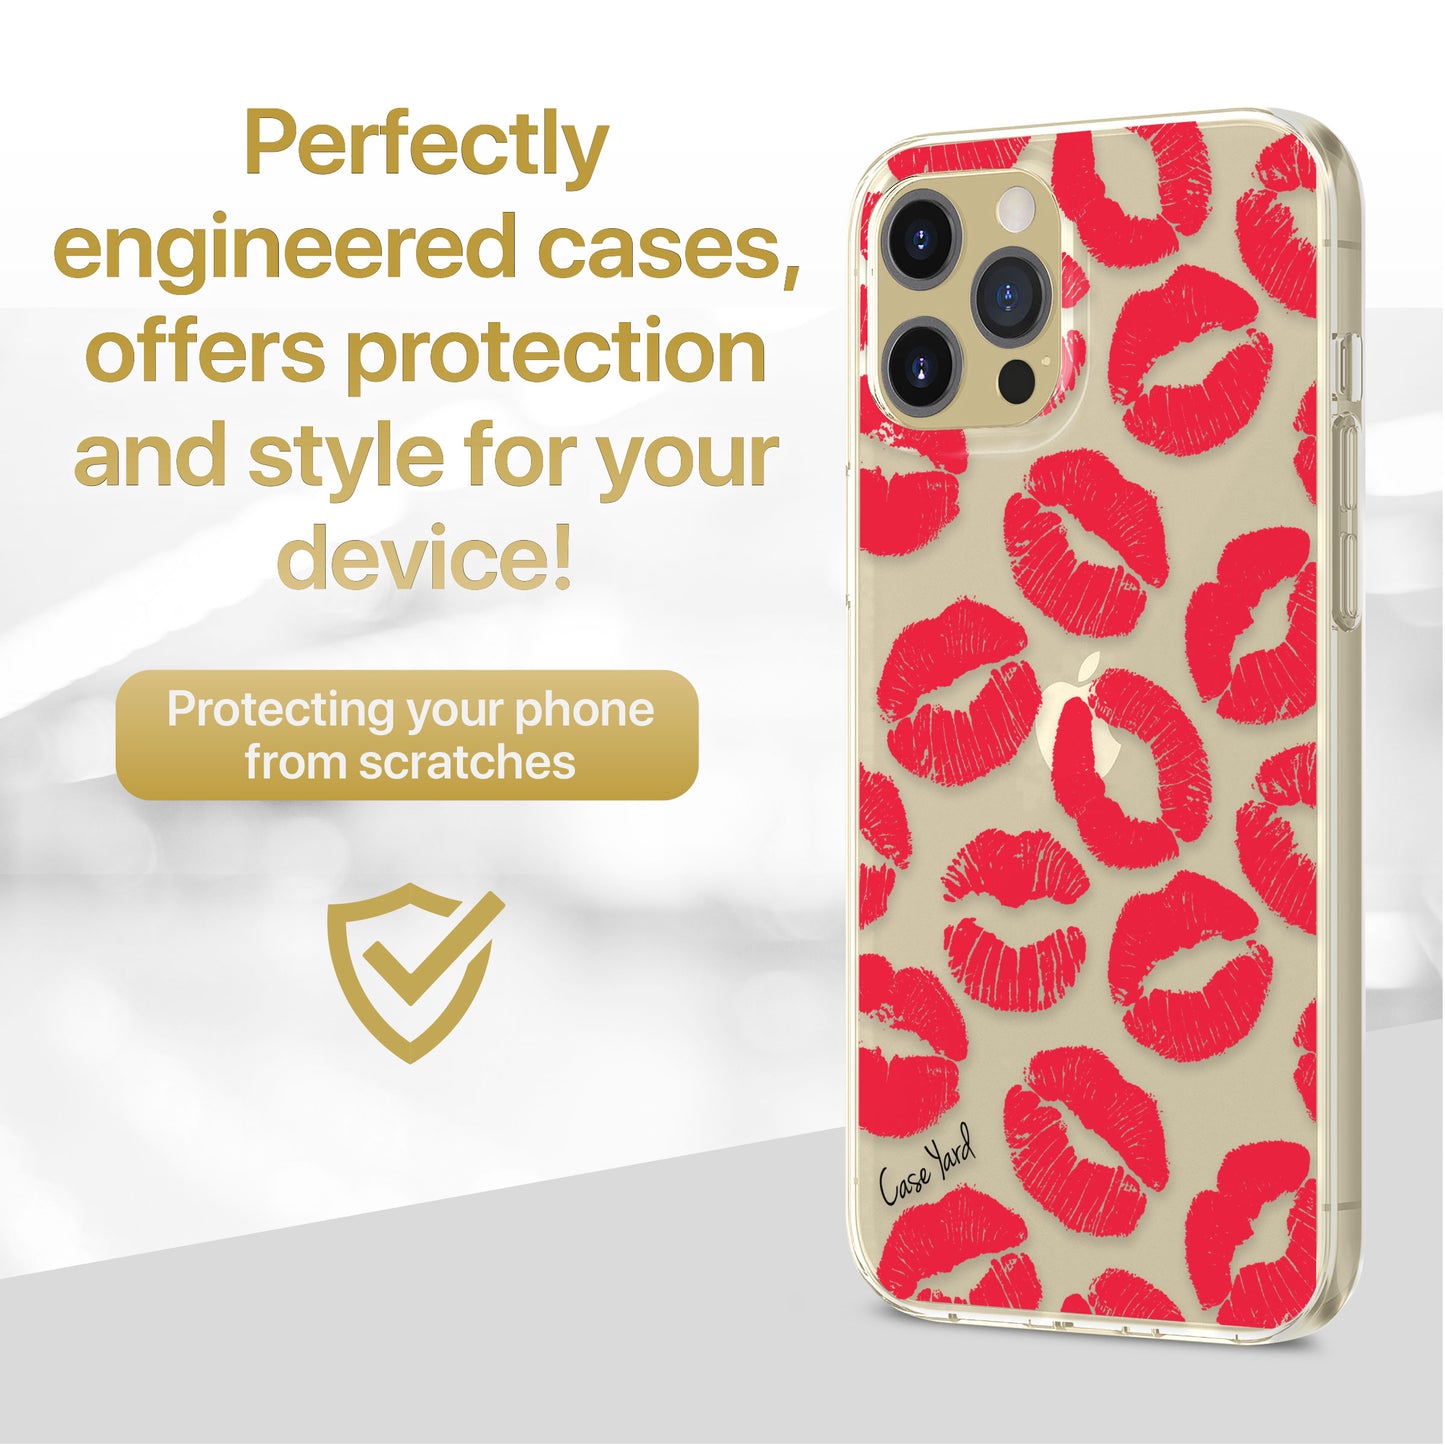 TPU Clear case with (Kisses) Design for iPhone & Samsung Phones